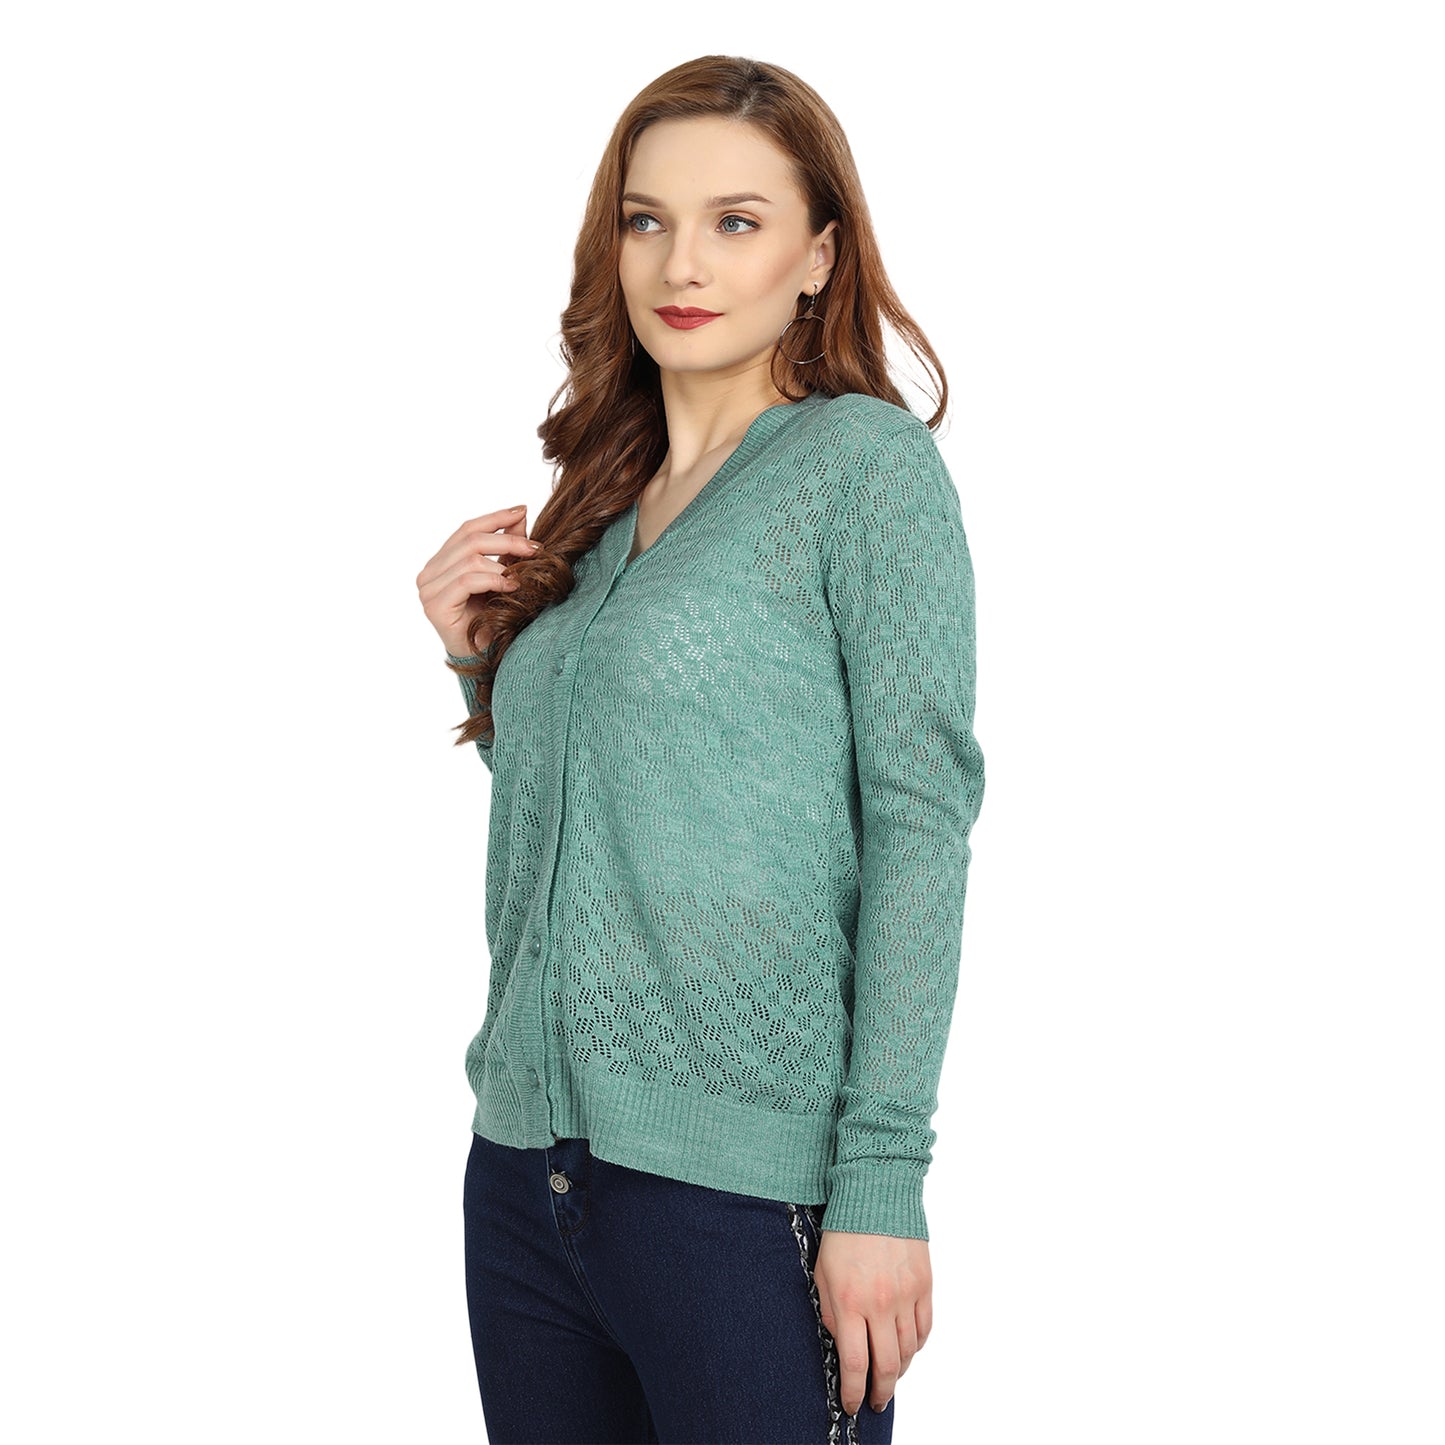 Clapton Acrylic Blend V Neck Full Sleeve Casual Solid Winter Wear Cardigans For Women Mint